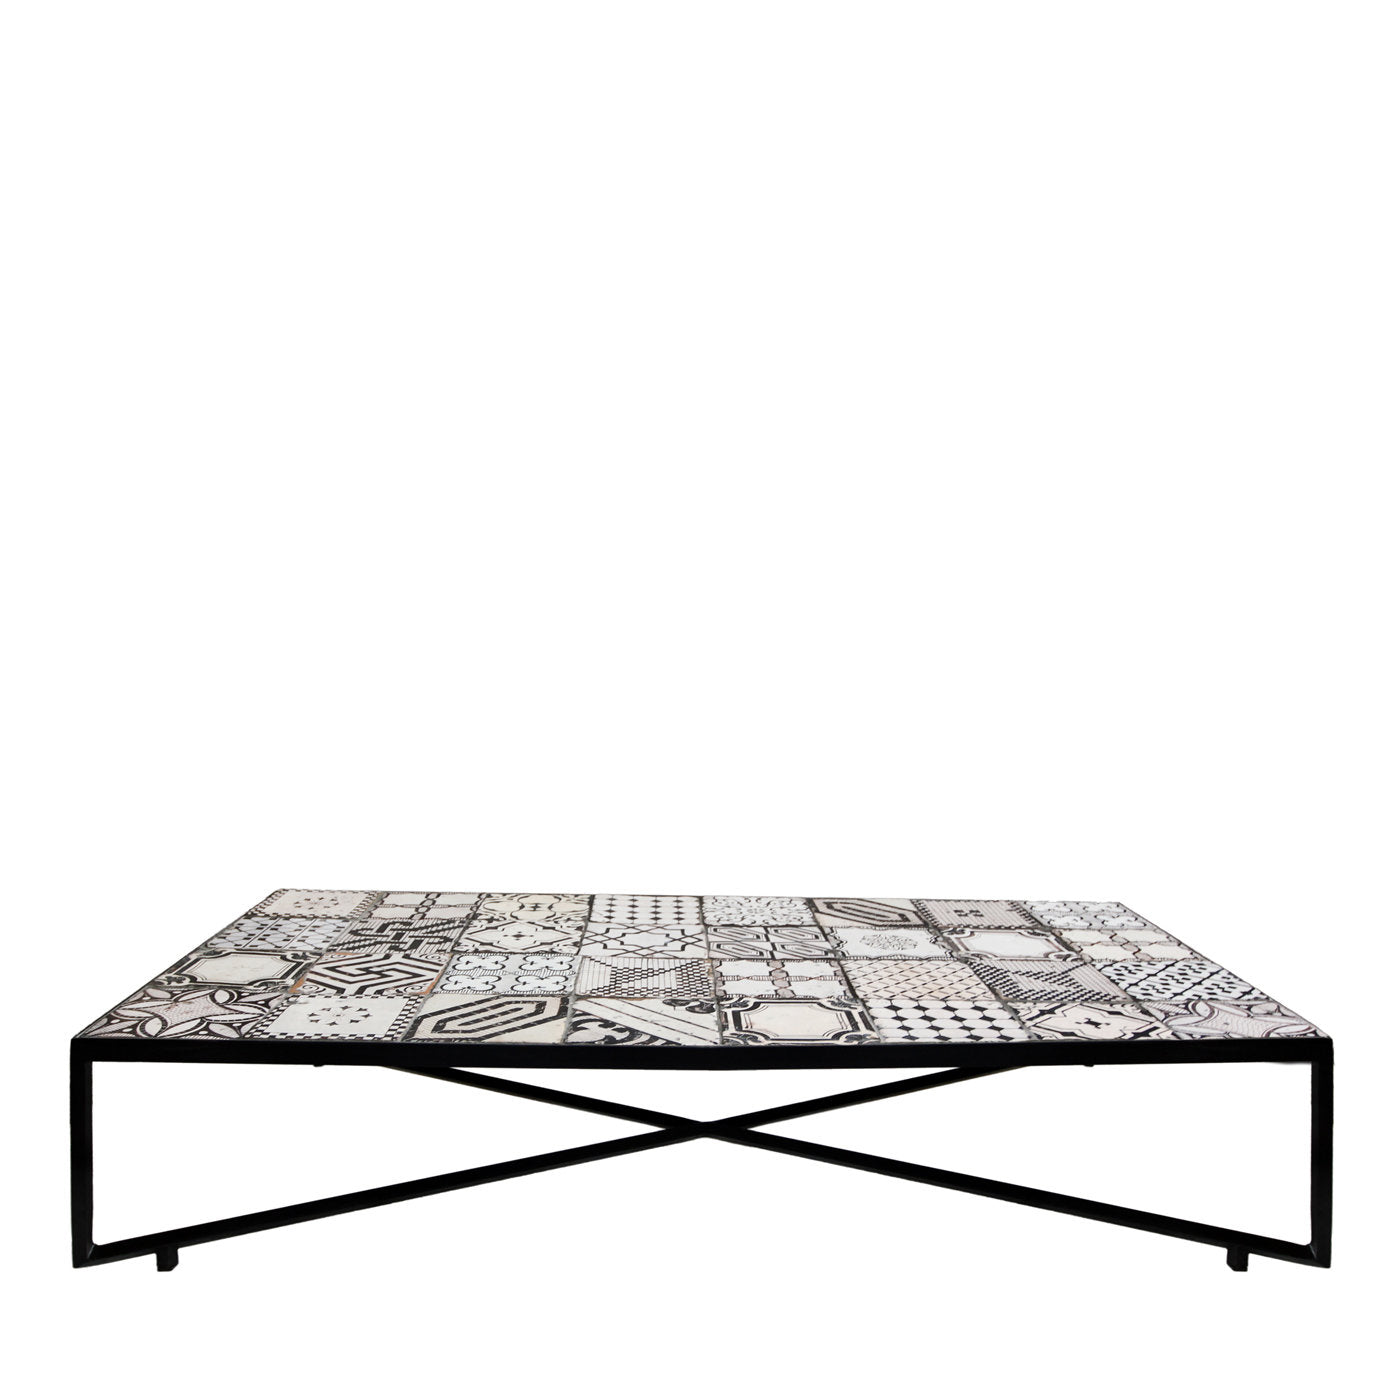 Spider Bespoke Coffee Table - Main view